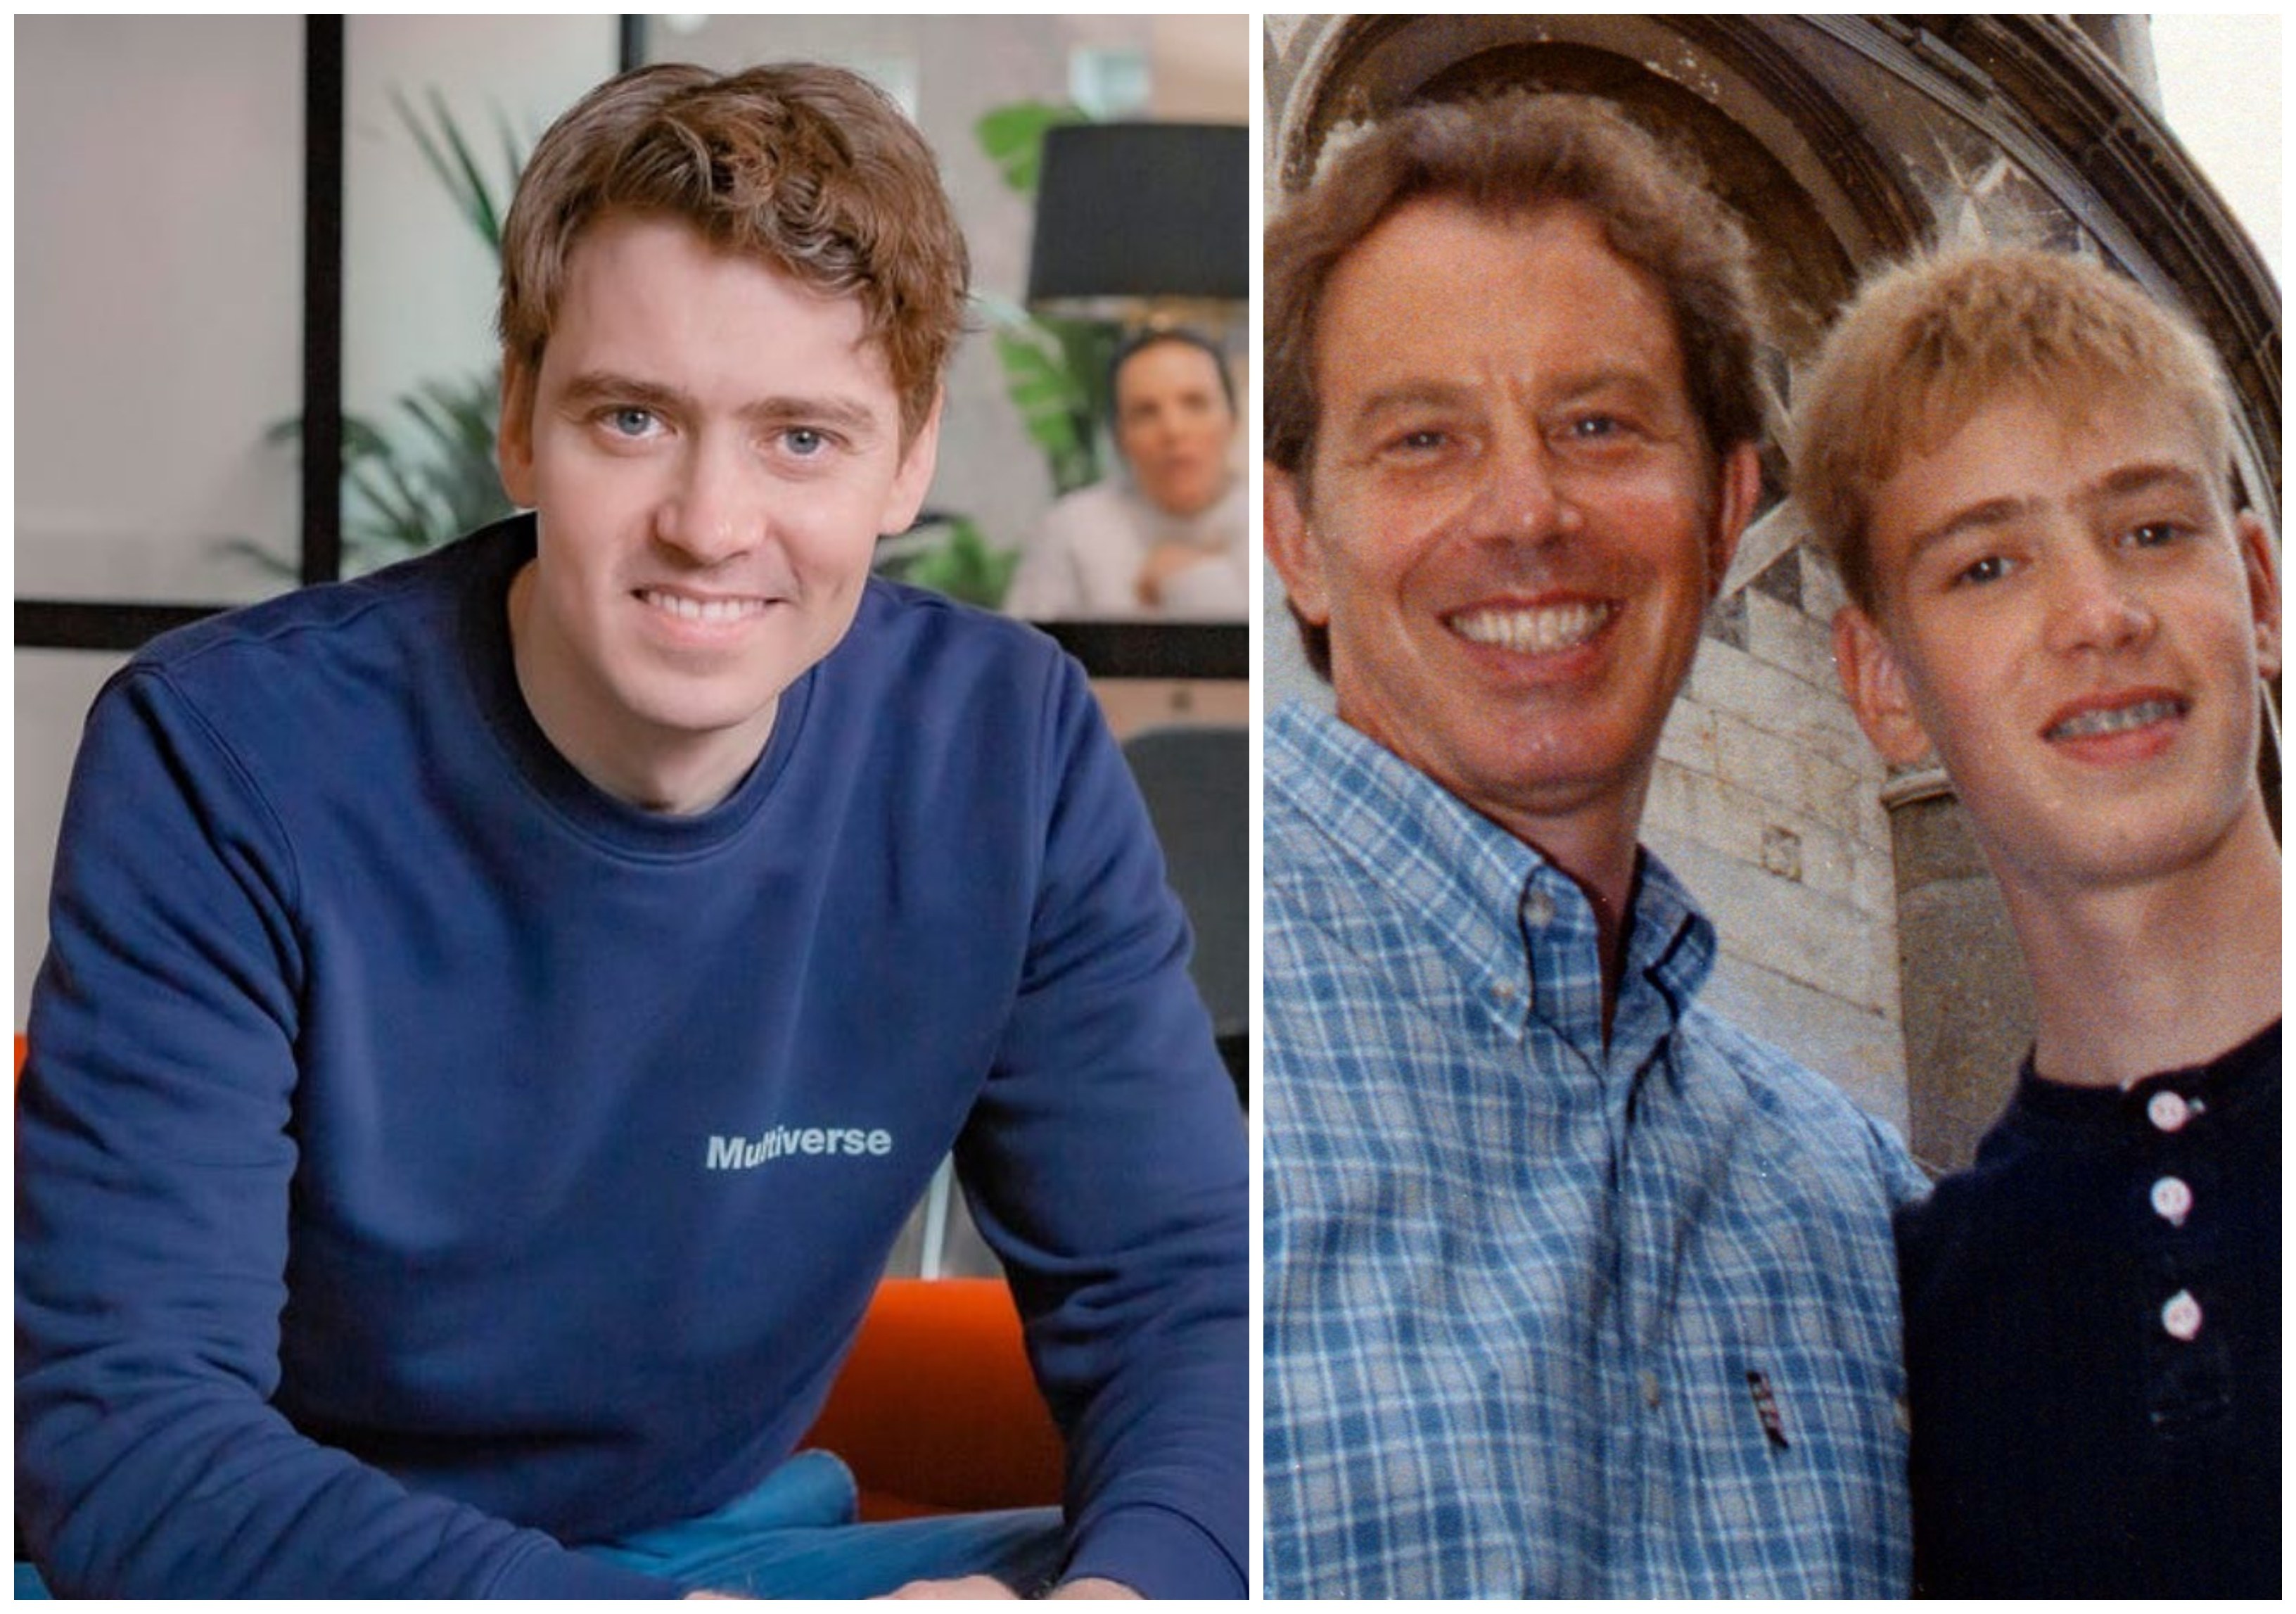 Euan Blair, the son of former UK prime minister Tony Blair, is an up-and-coming tech entrepreneur who’s already valued in the billions. Photos: @5wpr, AP/Instagram